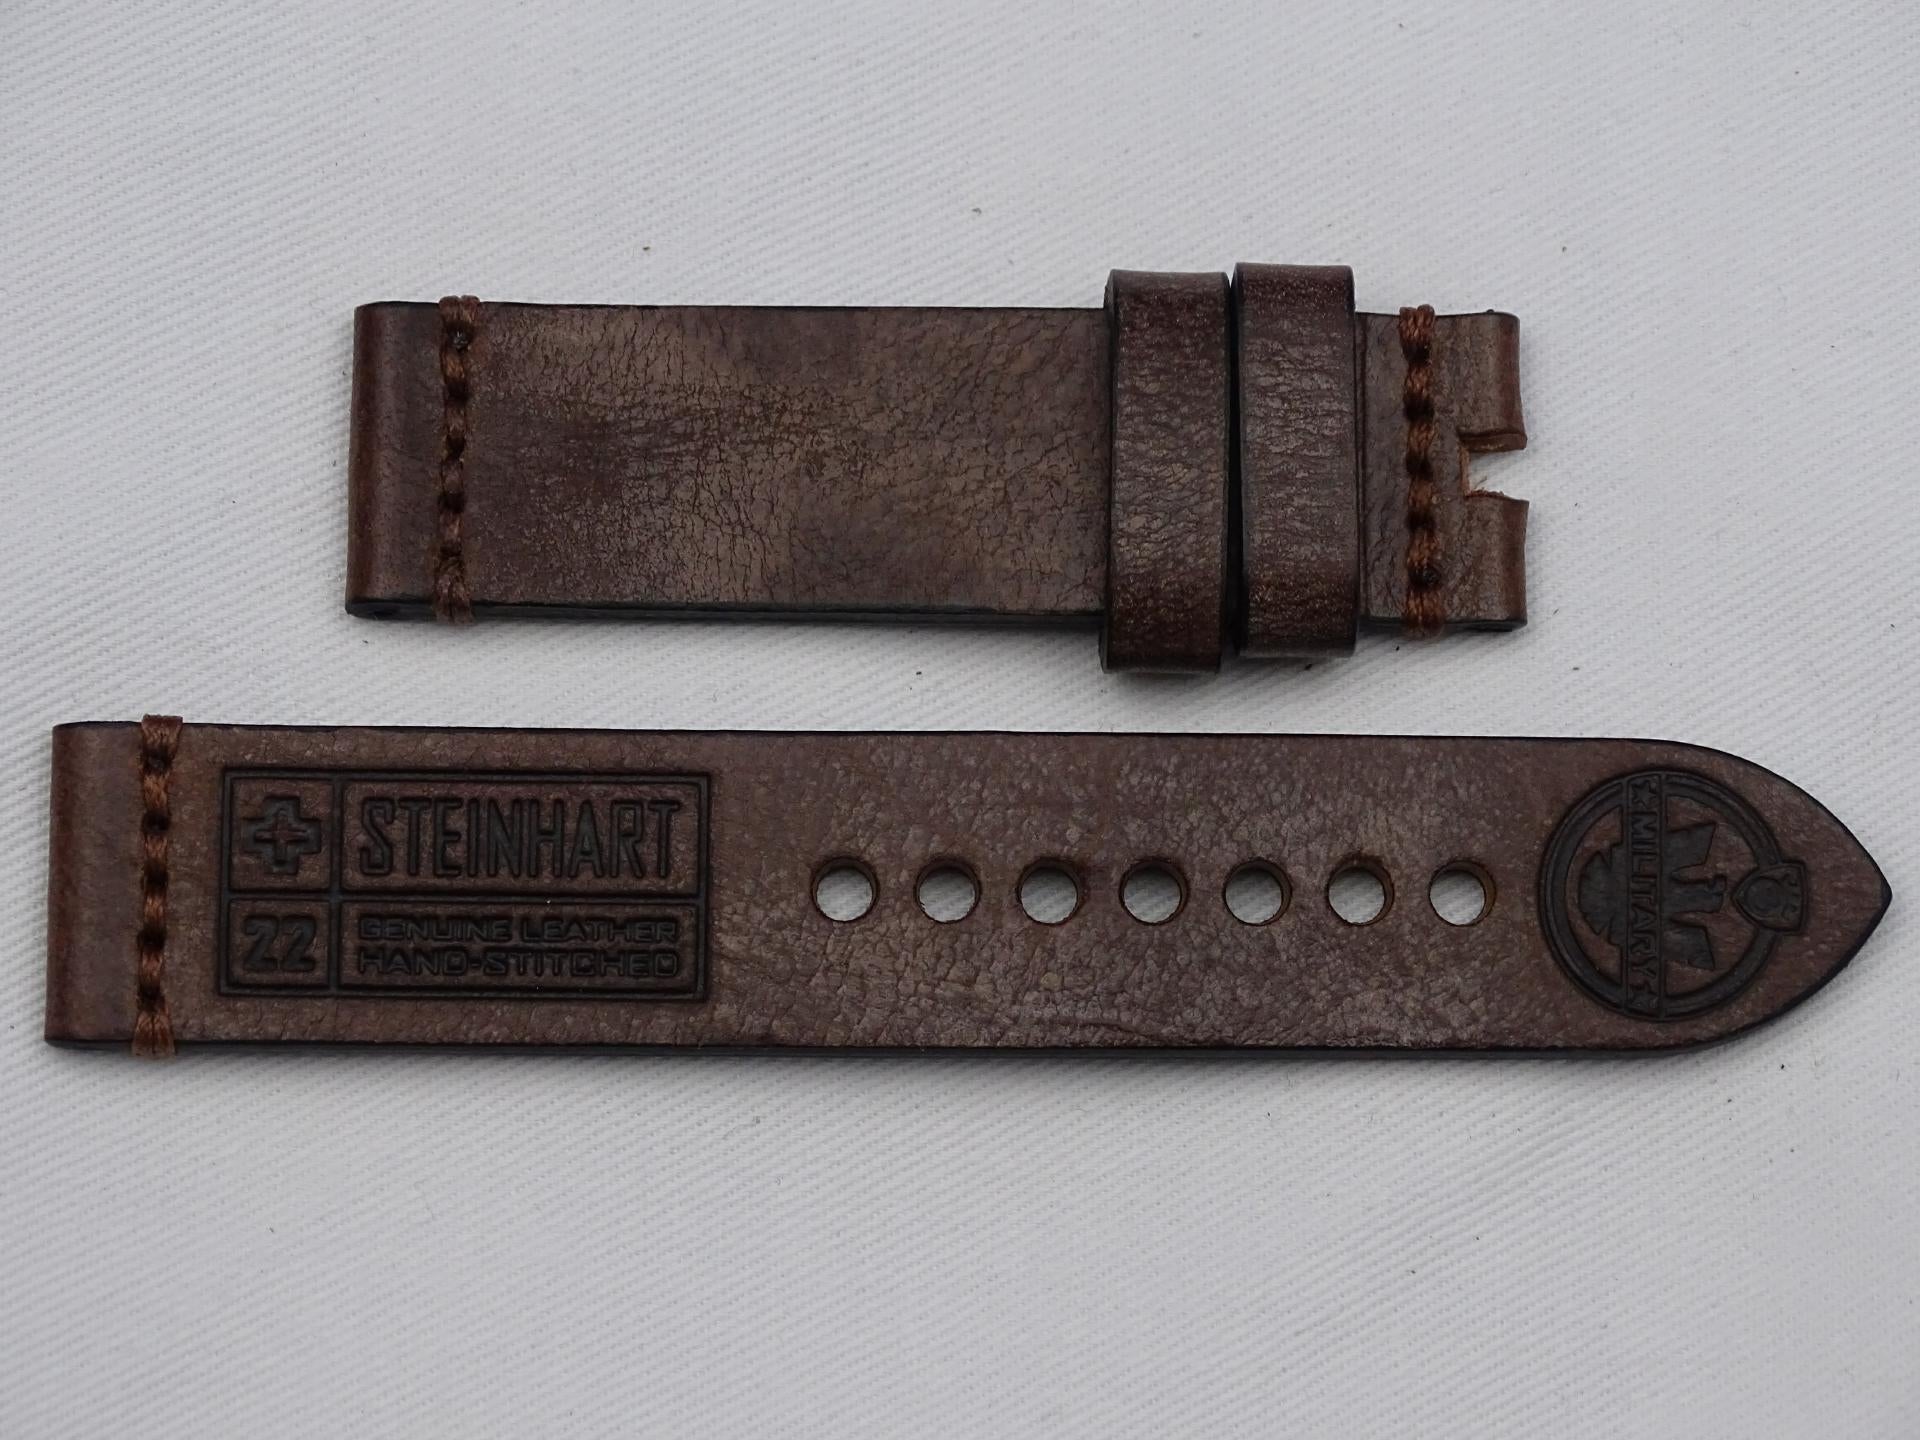 Leather Strap brown with brown stitching